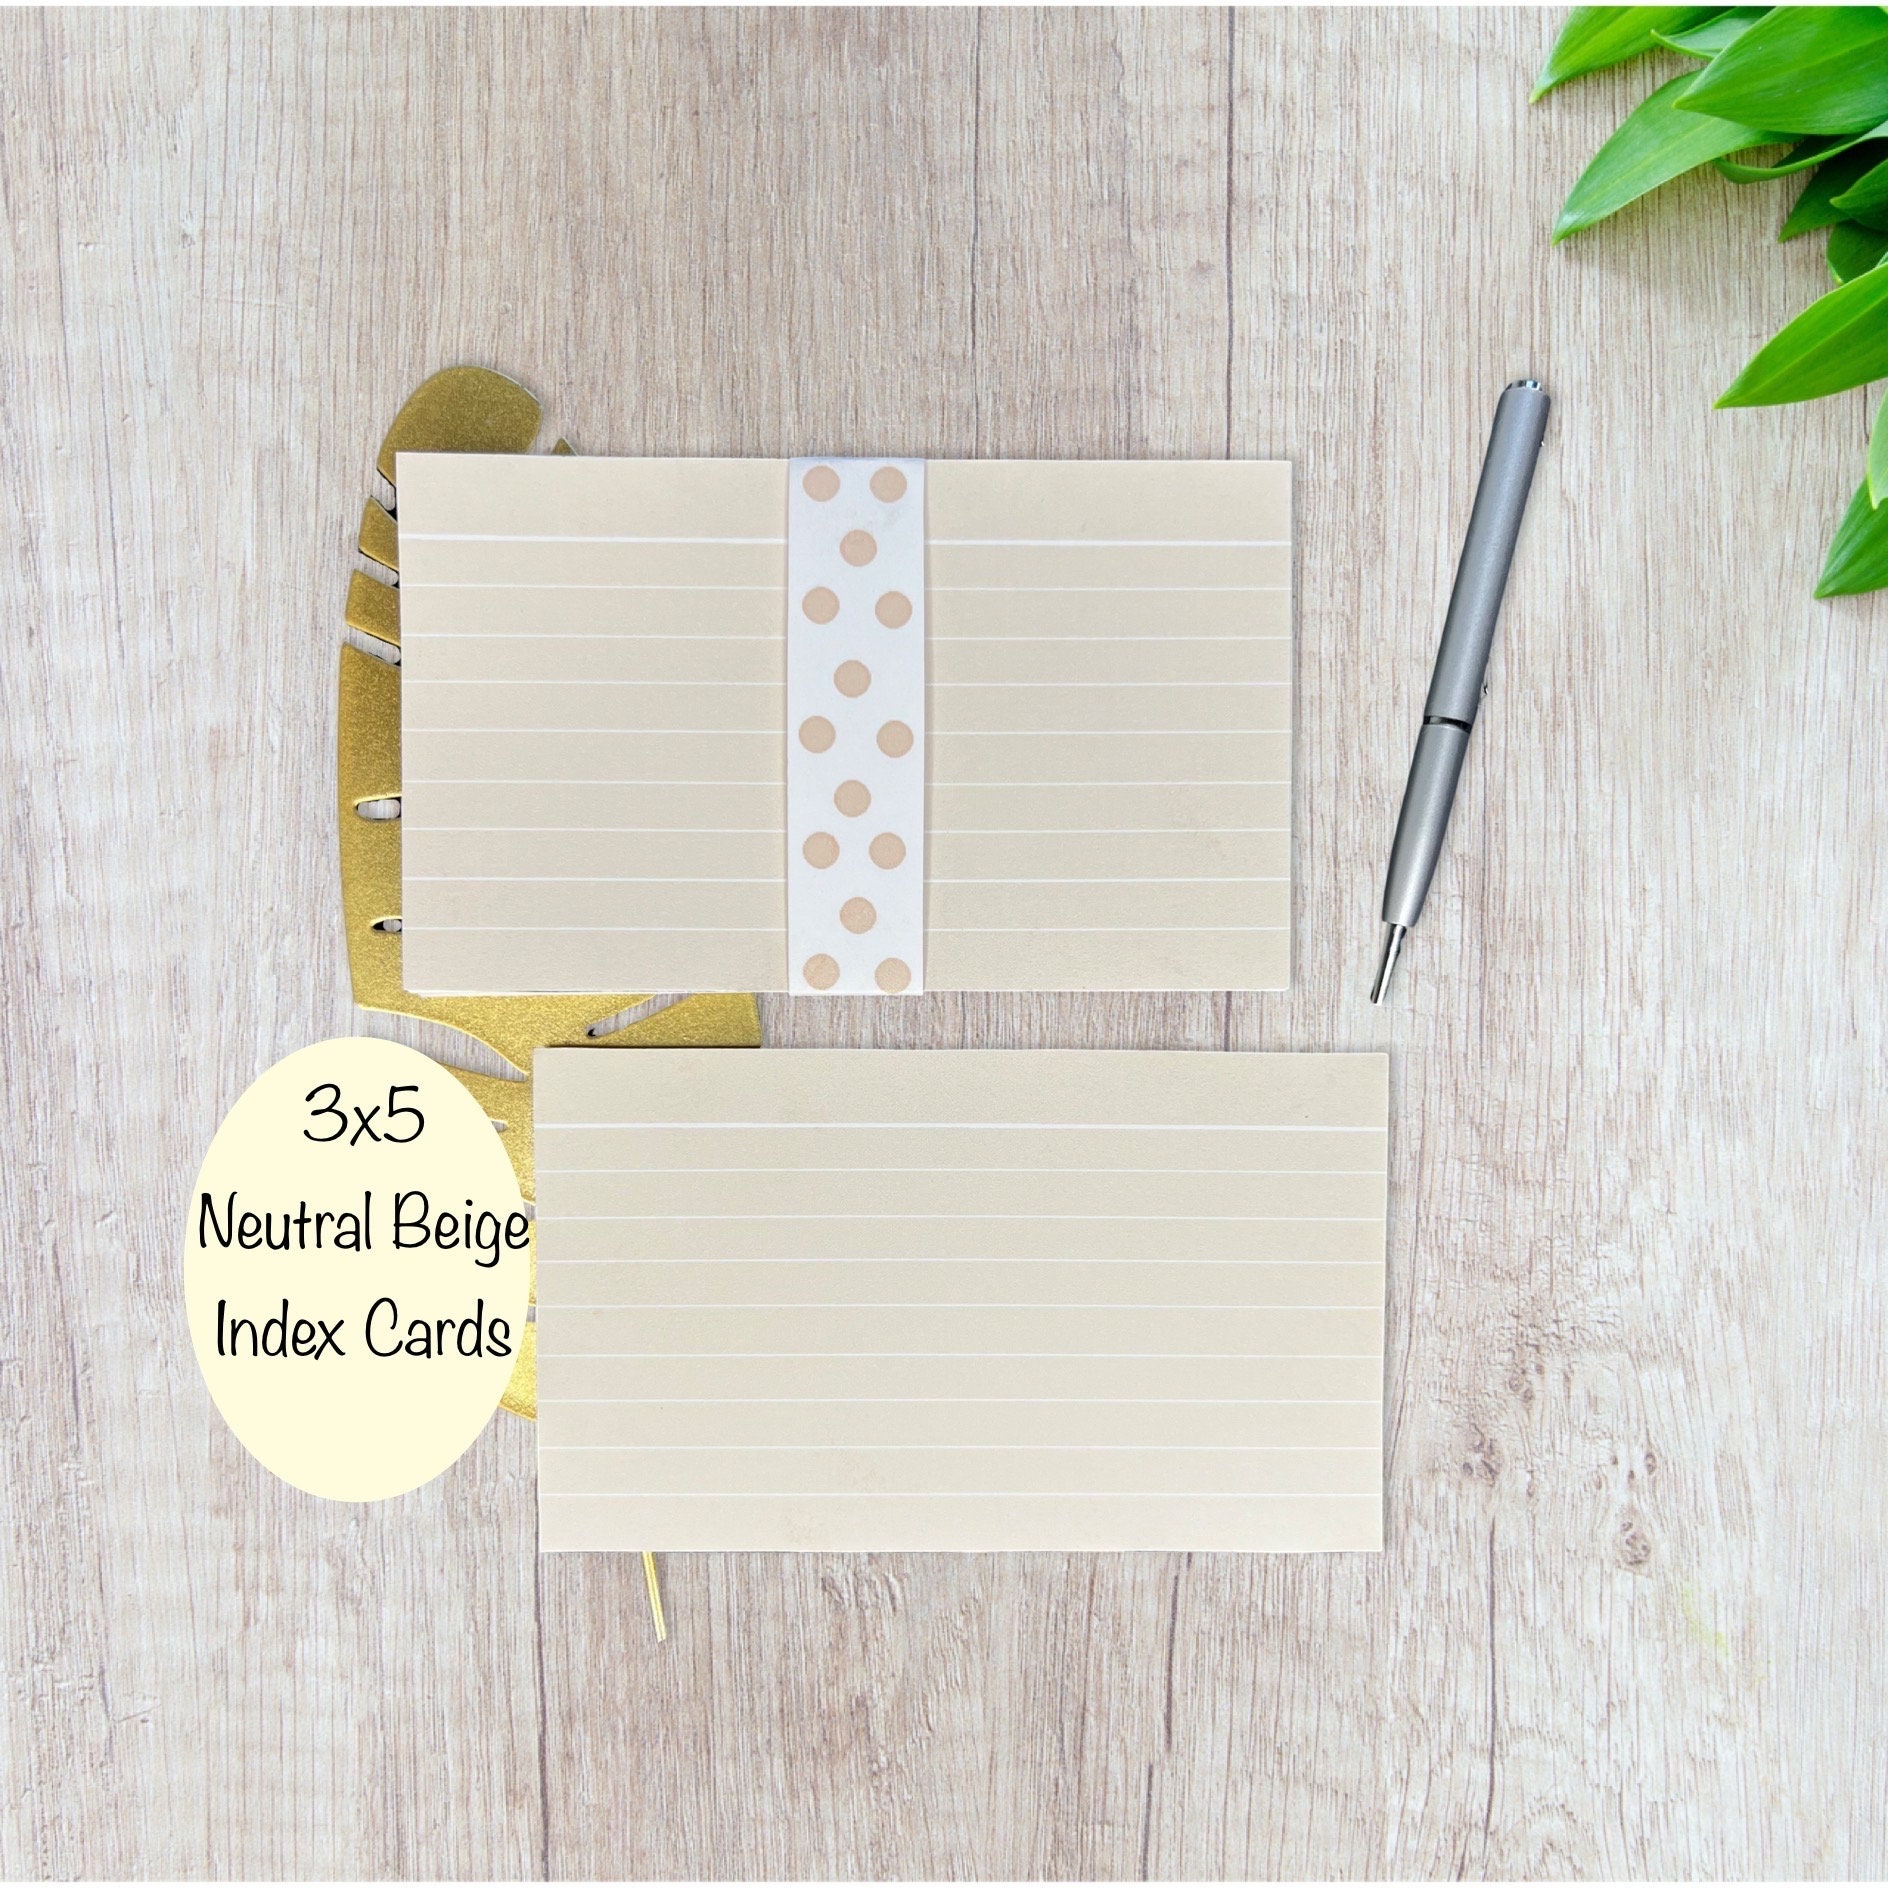 3x5 Index Cards Red Ruled Index Cards pack of 25 Index Cards Lined Floral  Rose Index Cards index Cards for Kids Study Note Card 